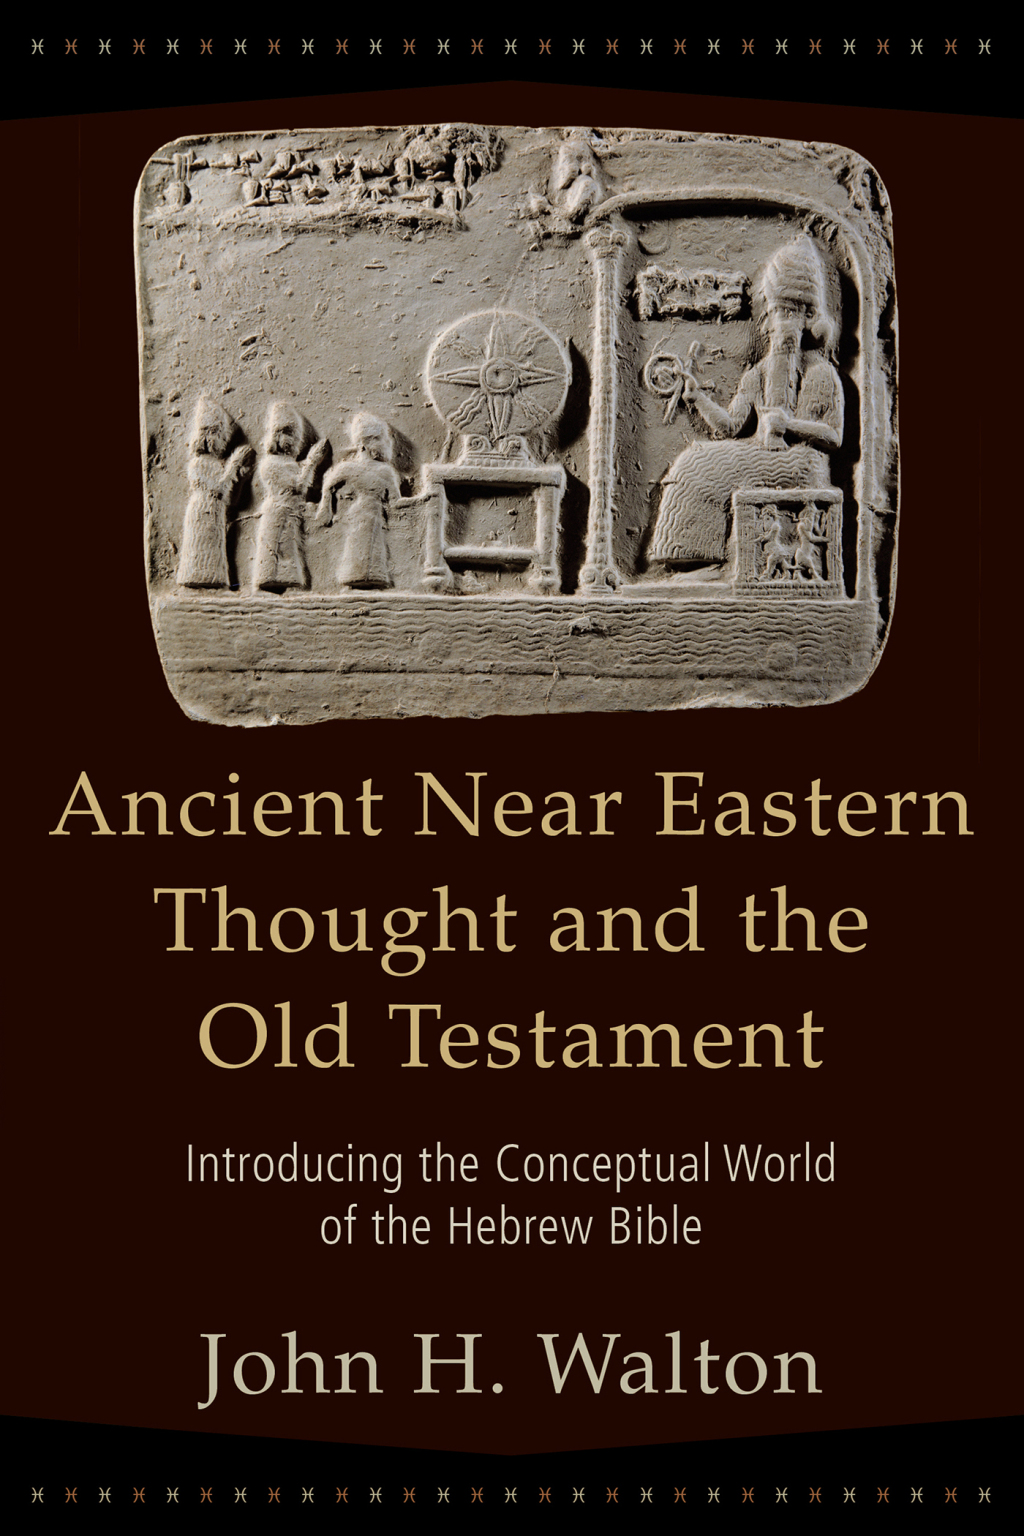 Ancient Near Eastern Thought and the Old Testament (eBook) - John H. Walton